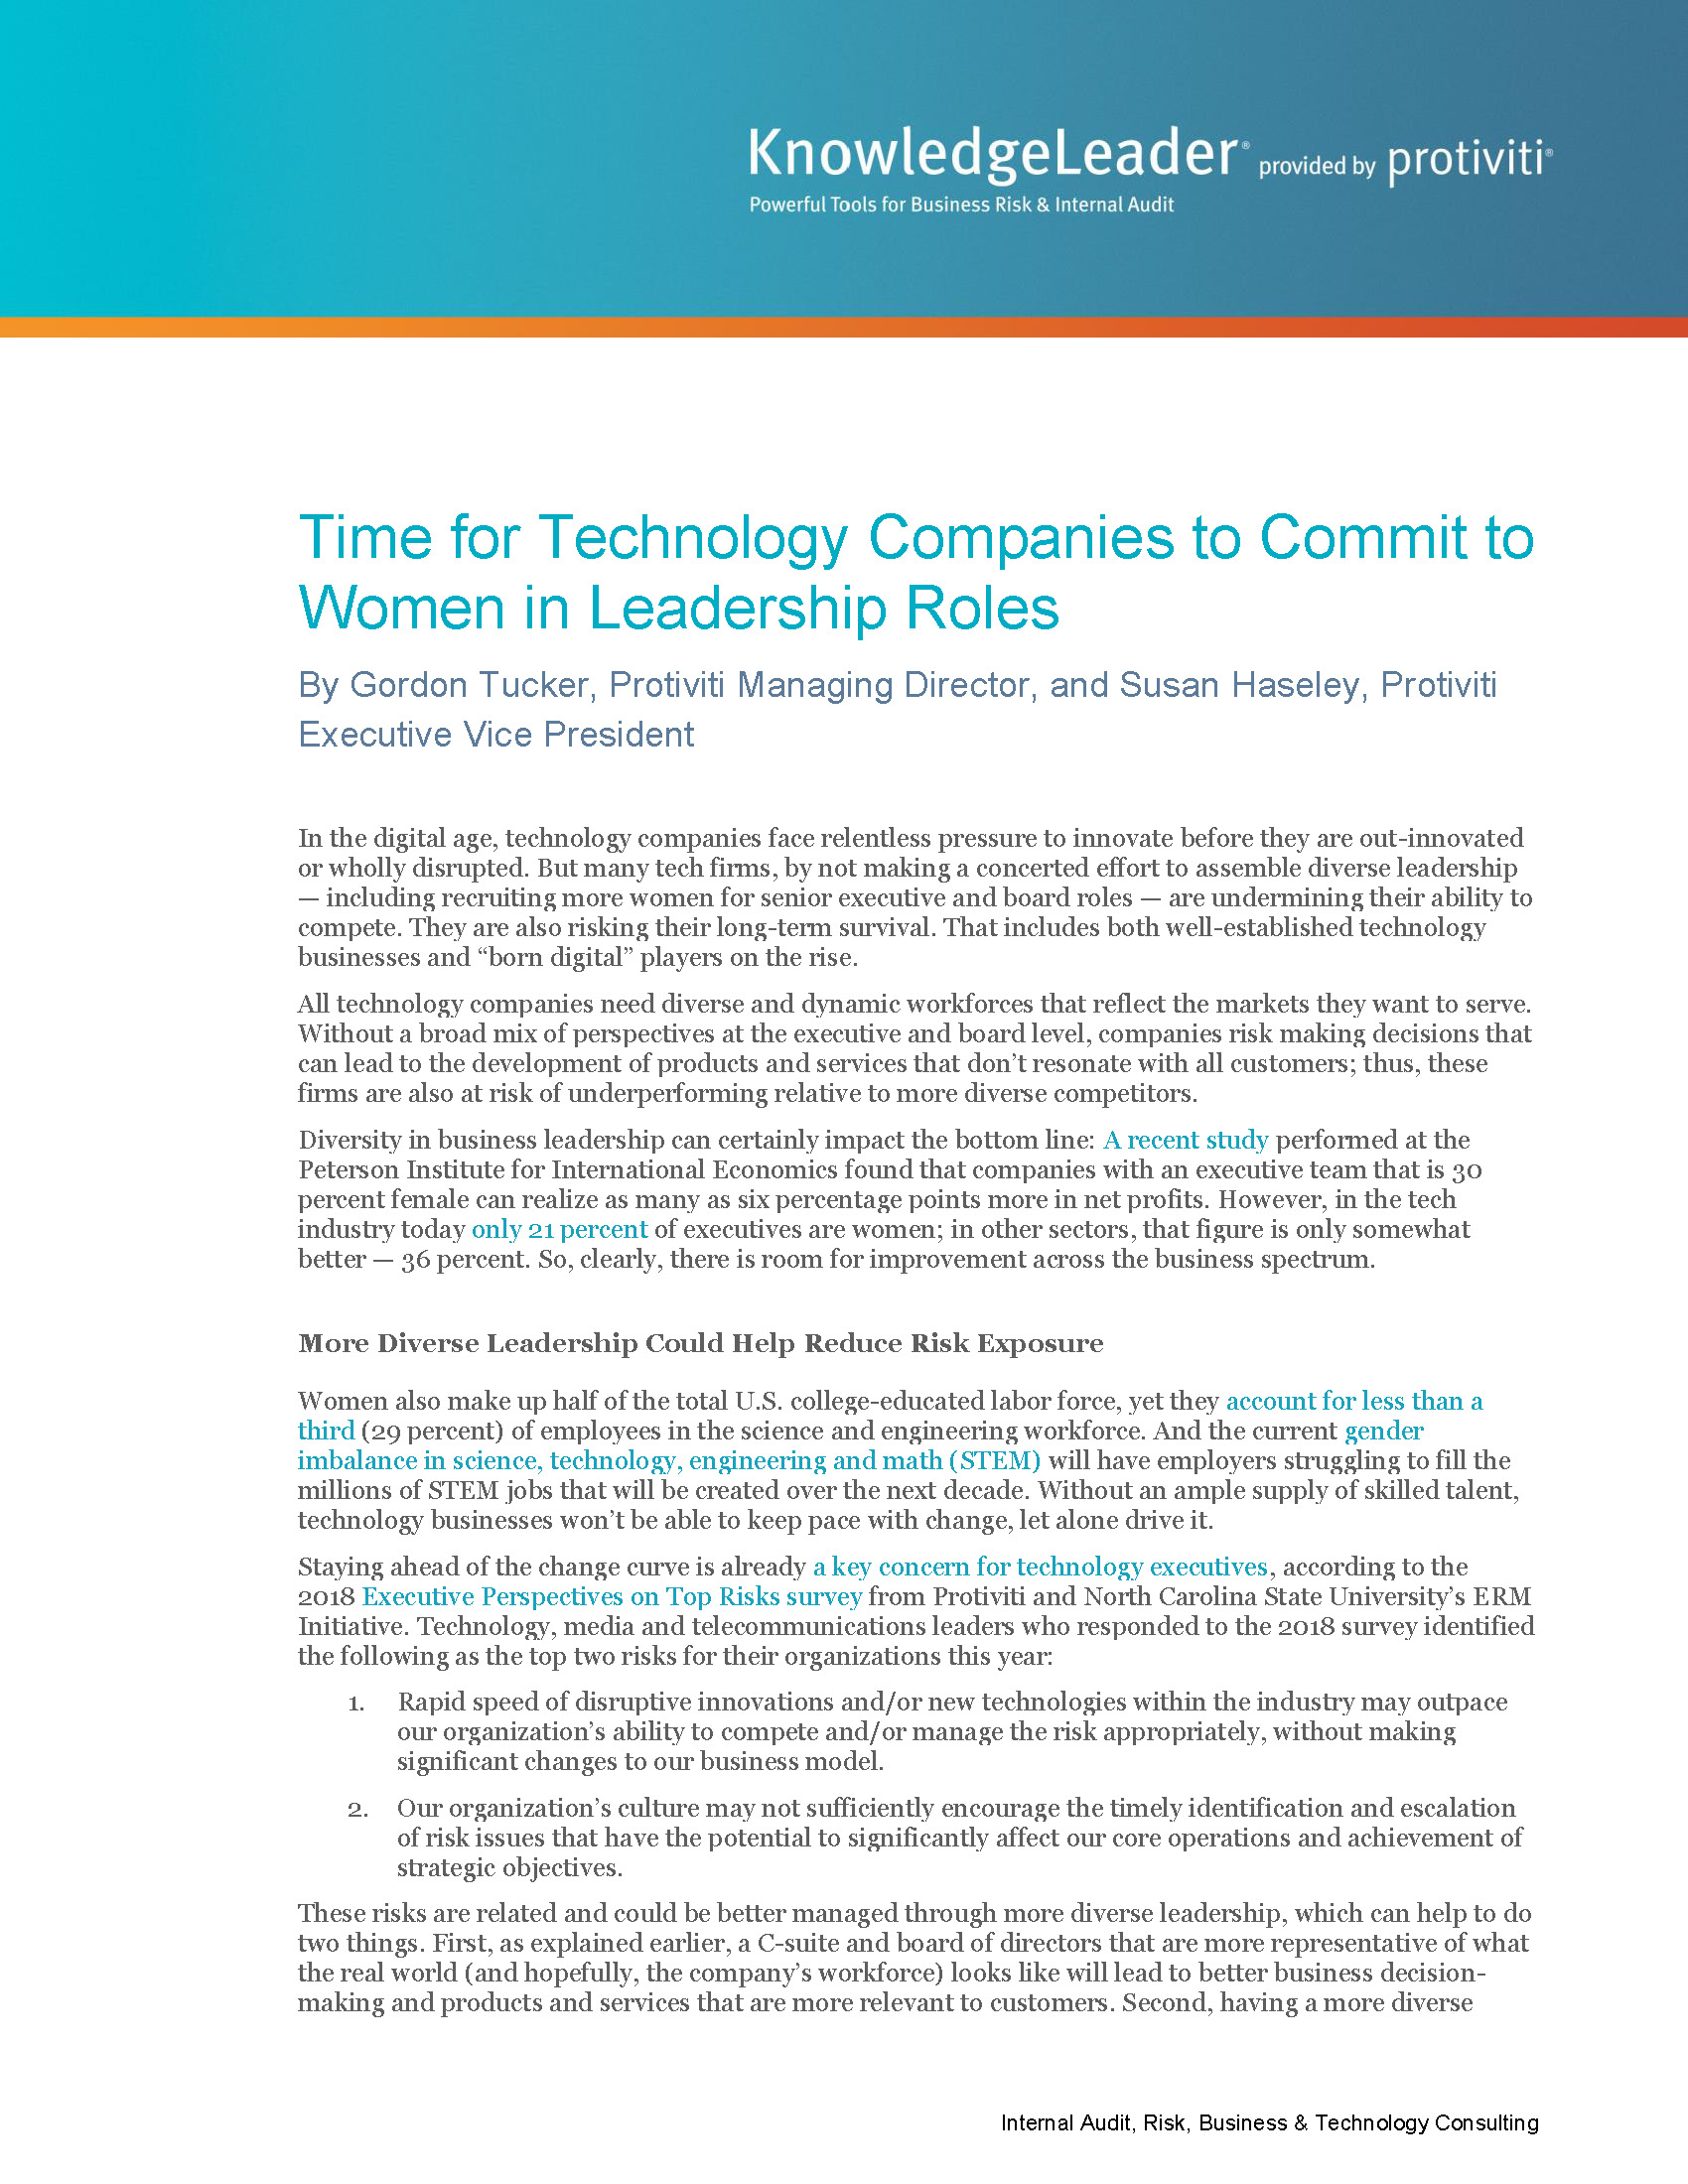 Screenshot of the first page of Time for Technology Companies to Commit to Women in Leadership Roles